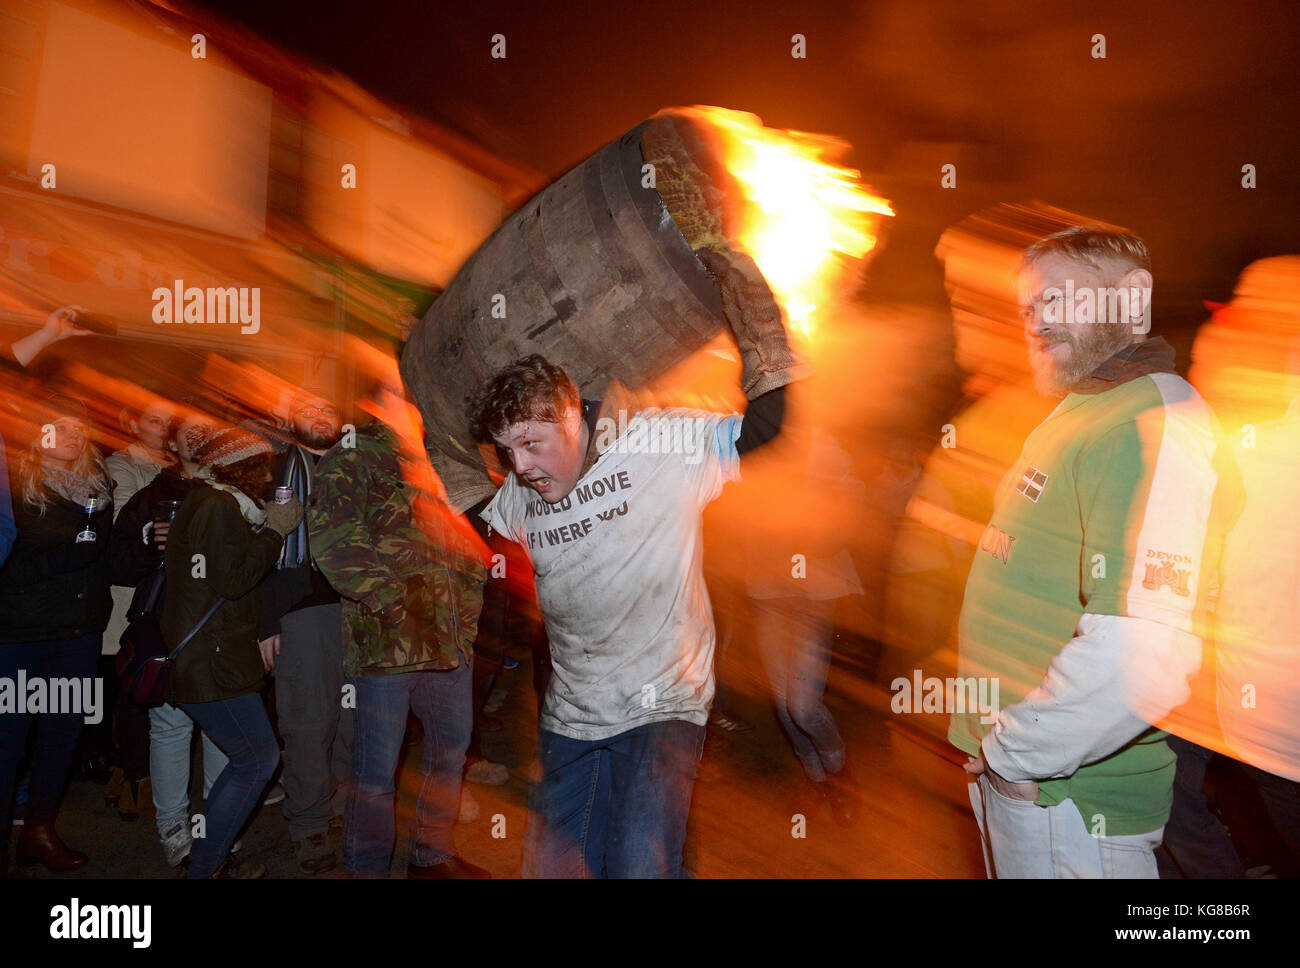 Participants run with a burning barrel soaked in tar at the annual Ottery St Mary tar barrel festival in Devon, UK Credit: Finnbarr Webster/Alamy Live News Stock Photo